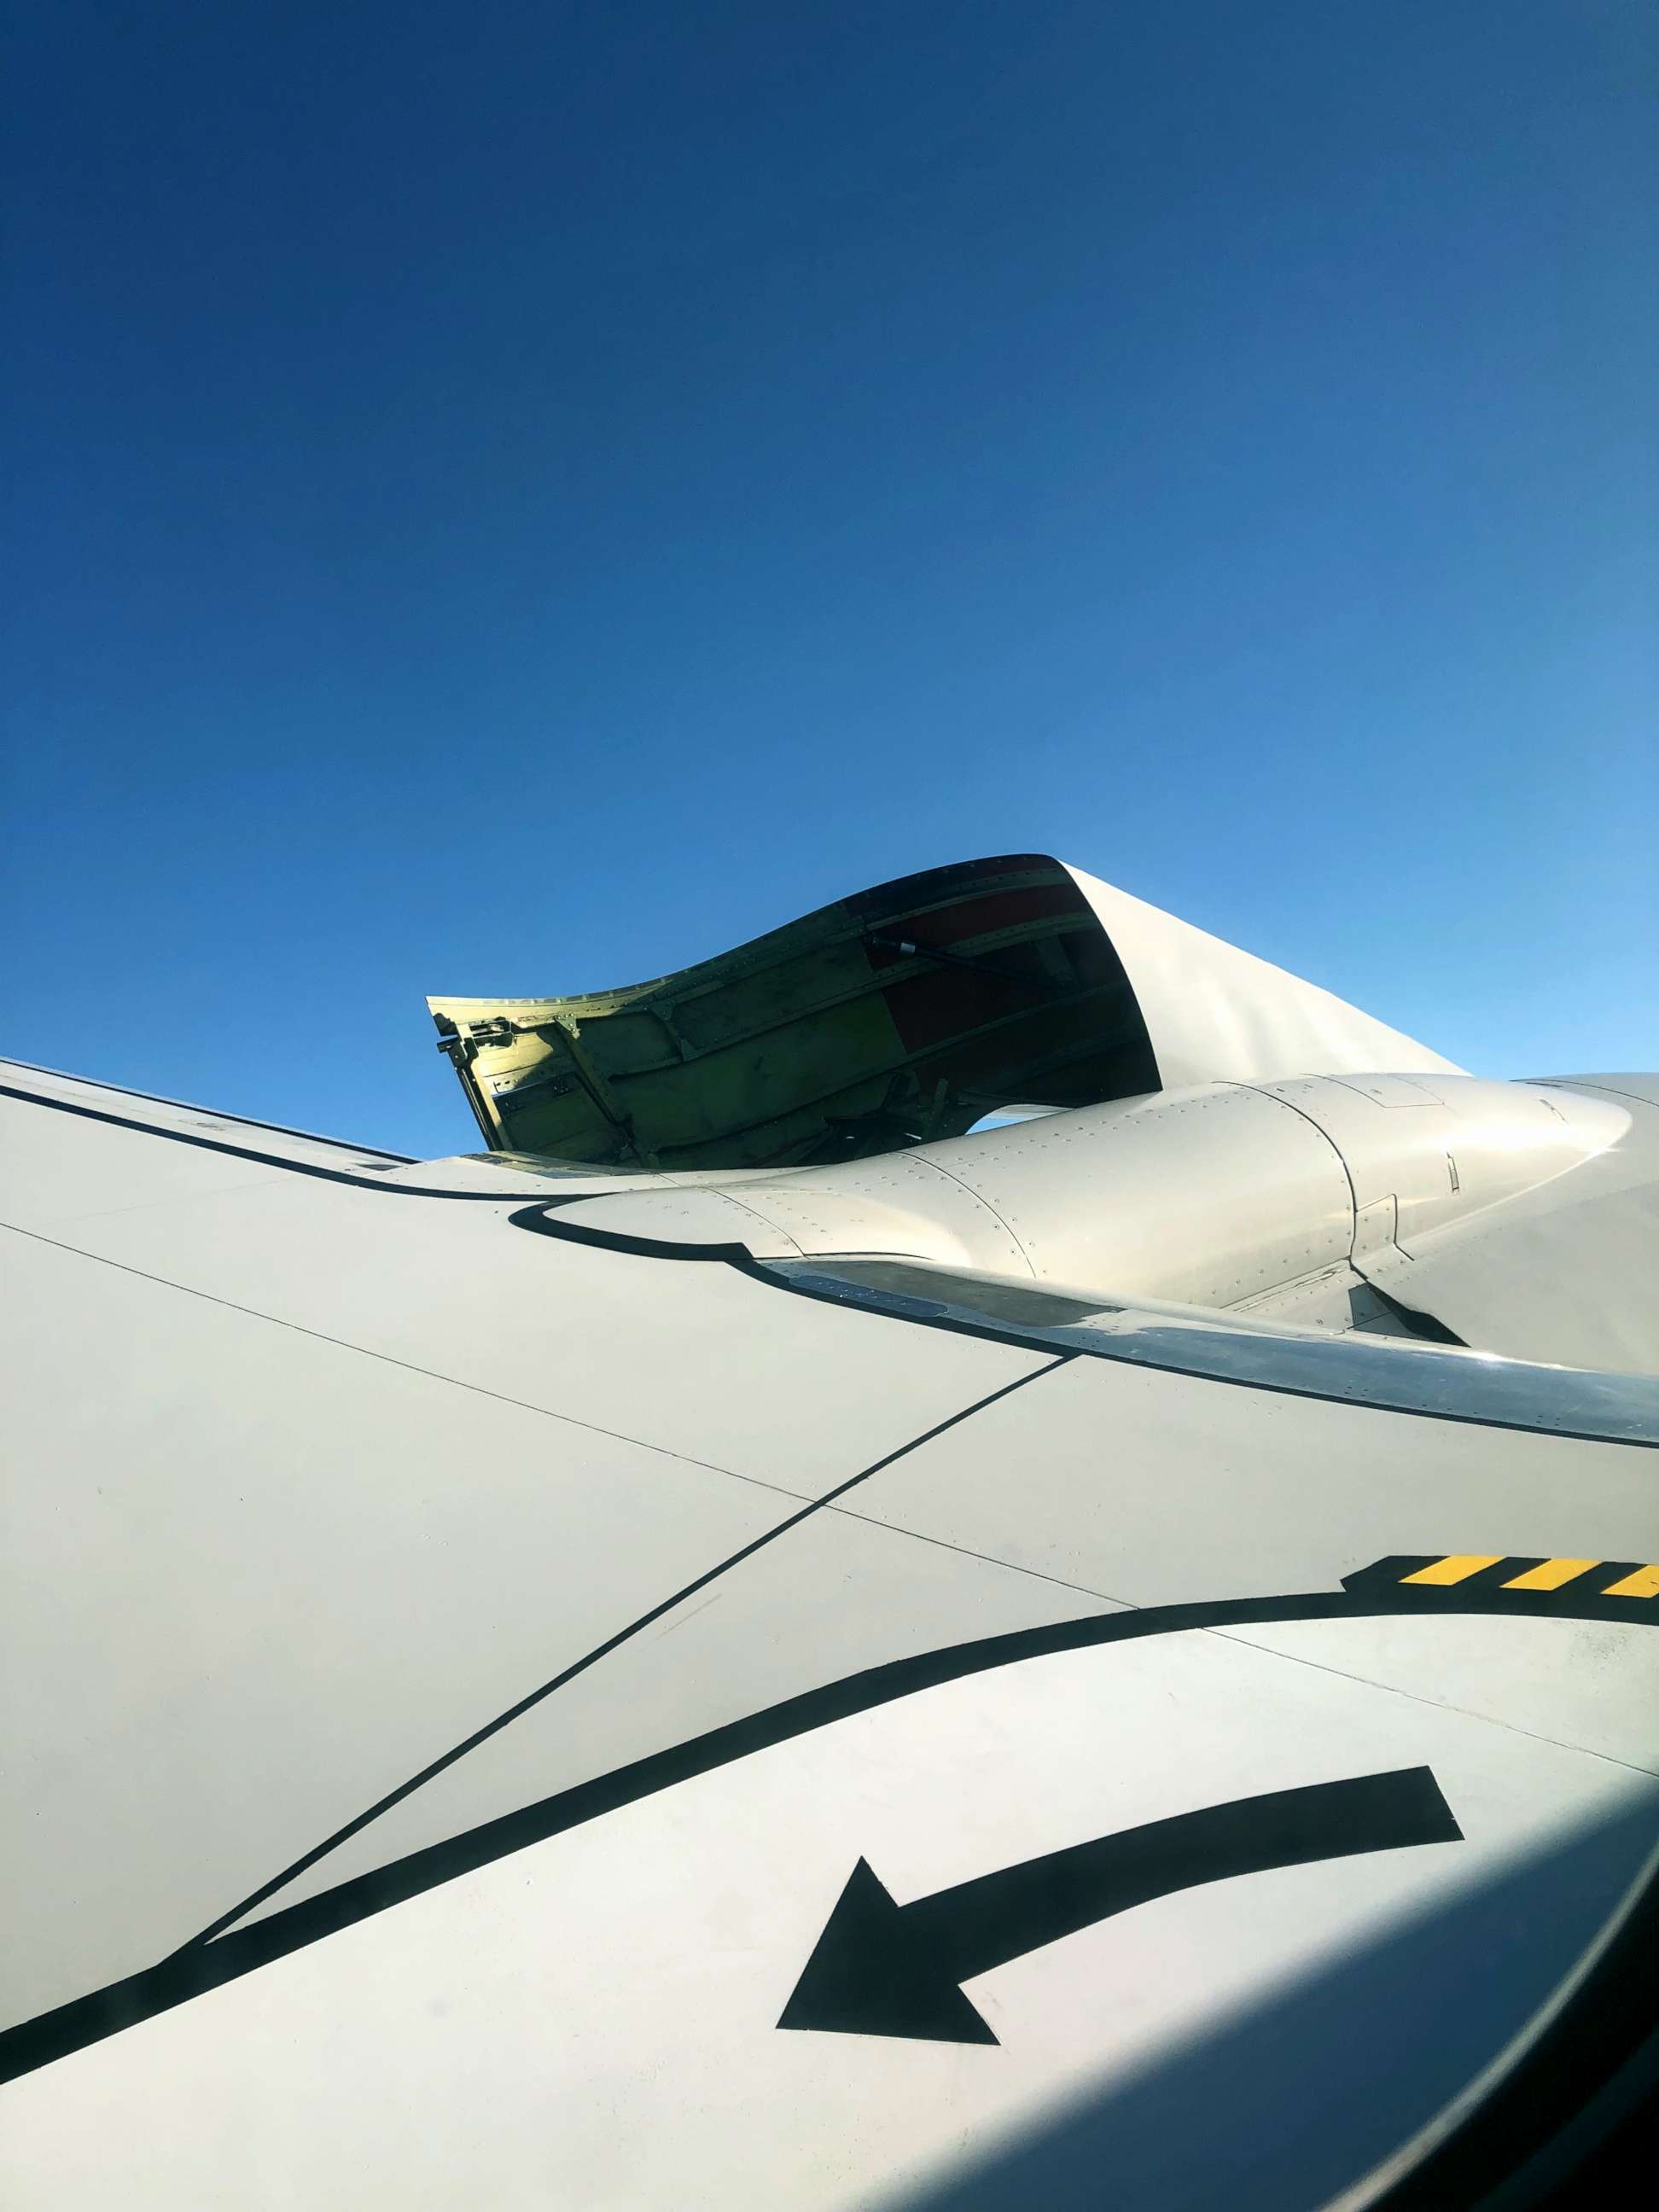 PHOTO: An engine flap on a United flight came detached midair, Sept. 29, 2019, after departing Denver International Airport.